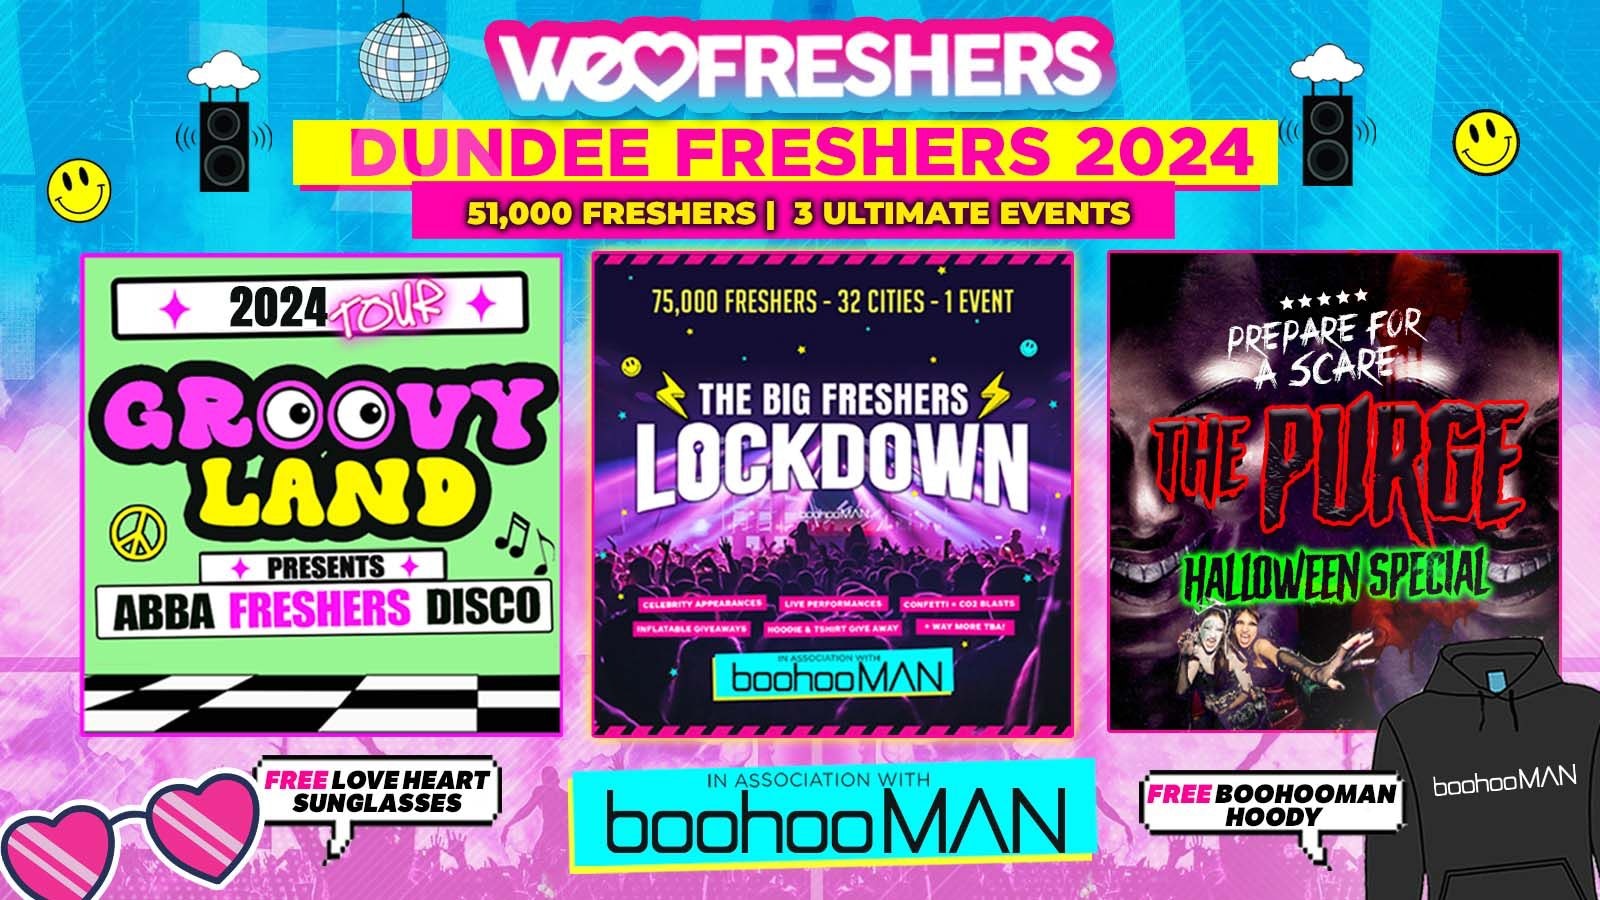 WE LOVE DUNDEE FRESHERS 2024 in association with boohooMAN ❗3 EVENTS❗